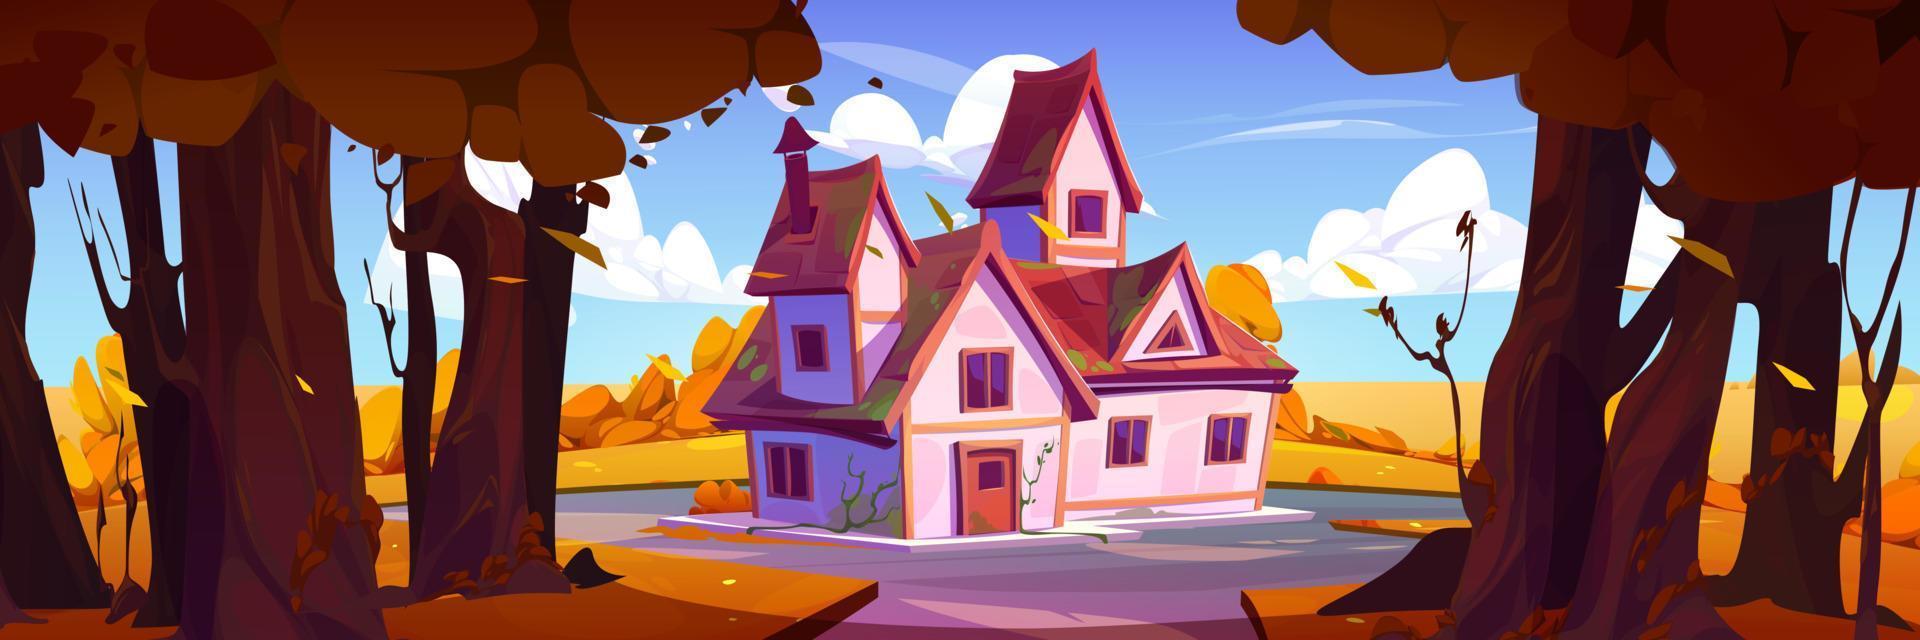 Autumn landscape with forest and village house vector